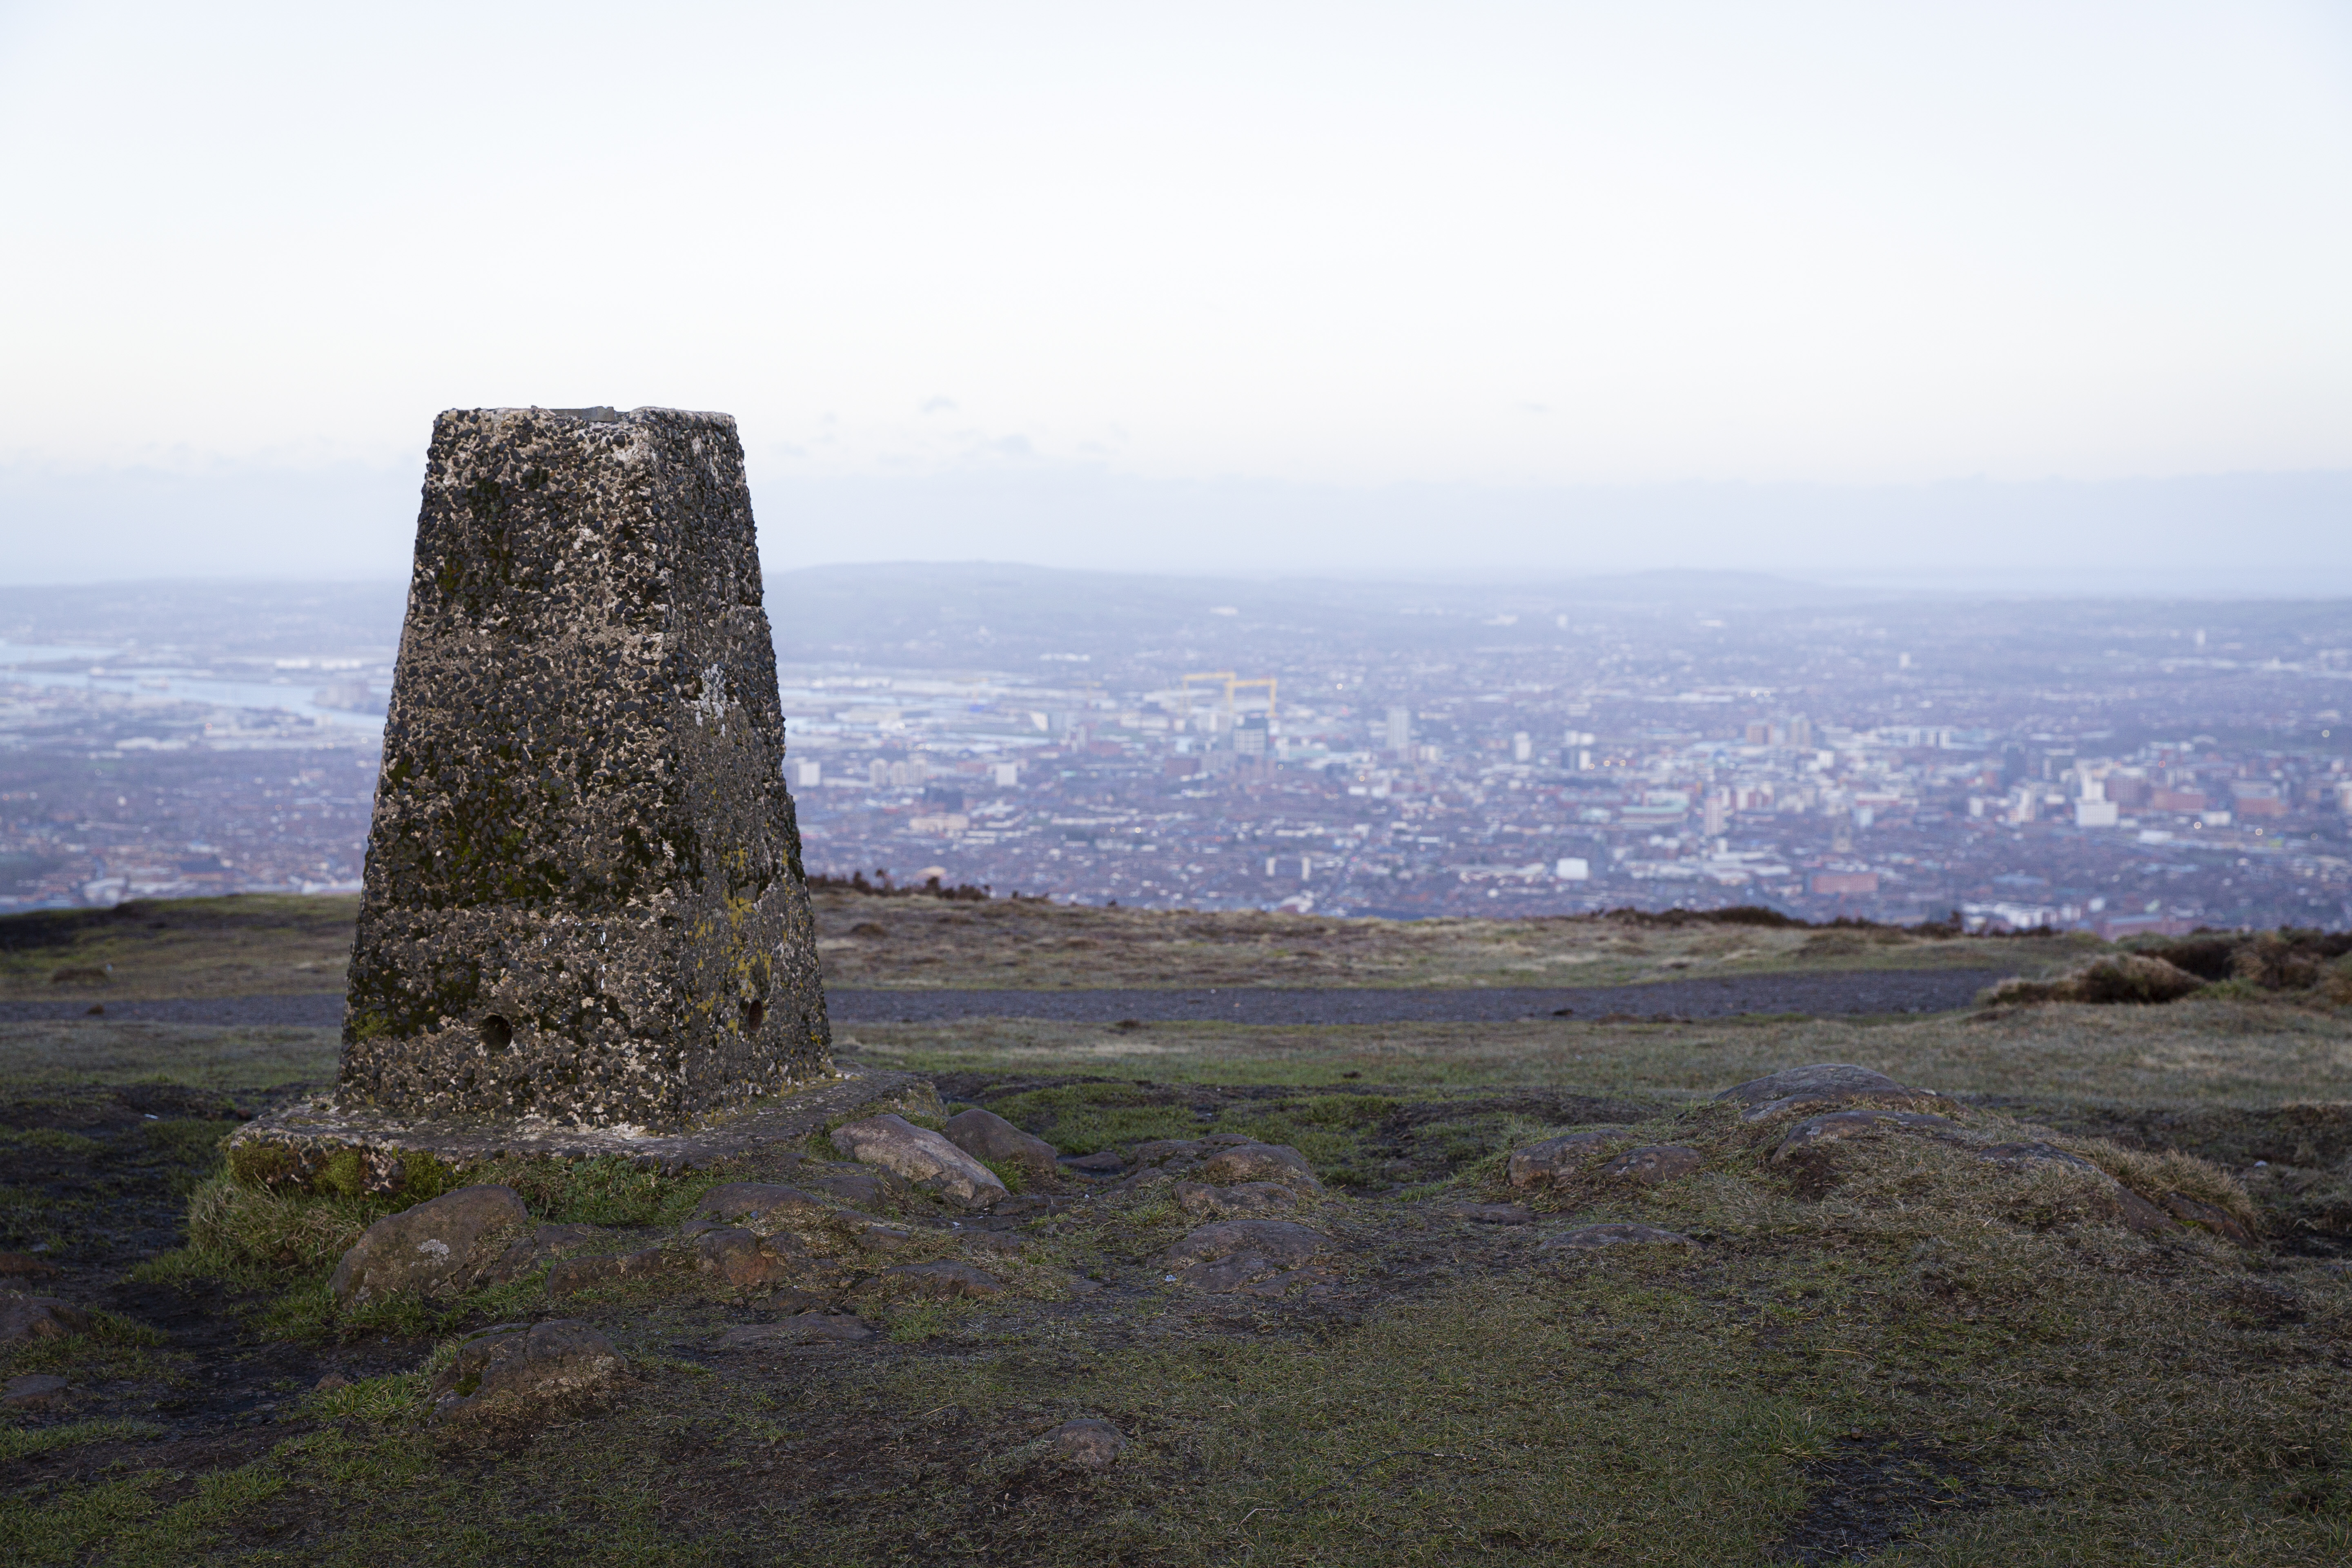 Surveying the surveyors - How Divis helped map Ireland